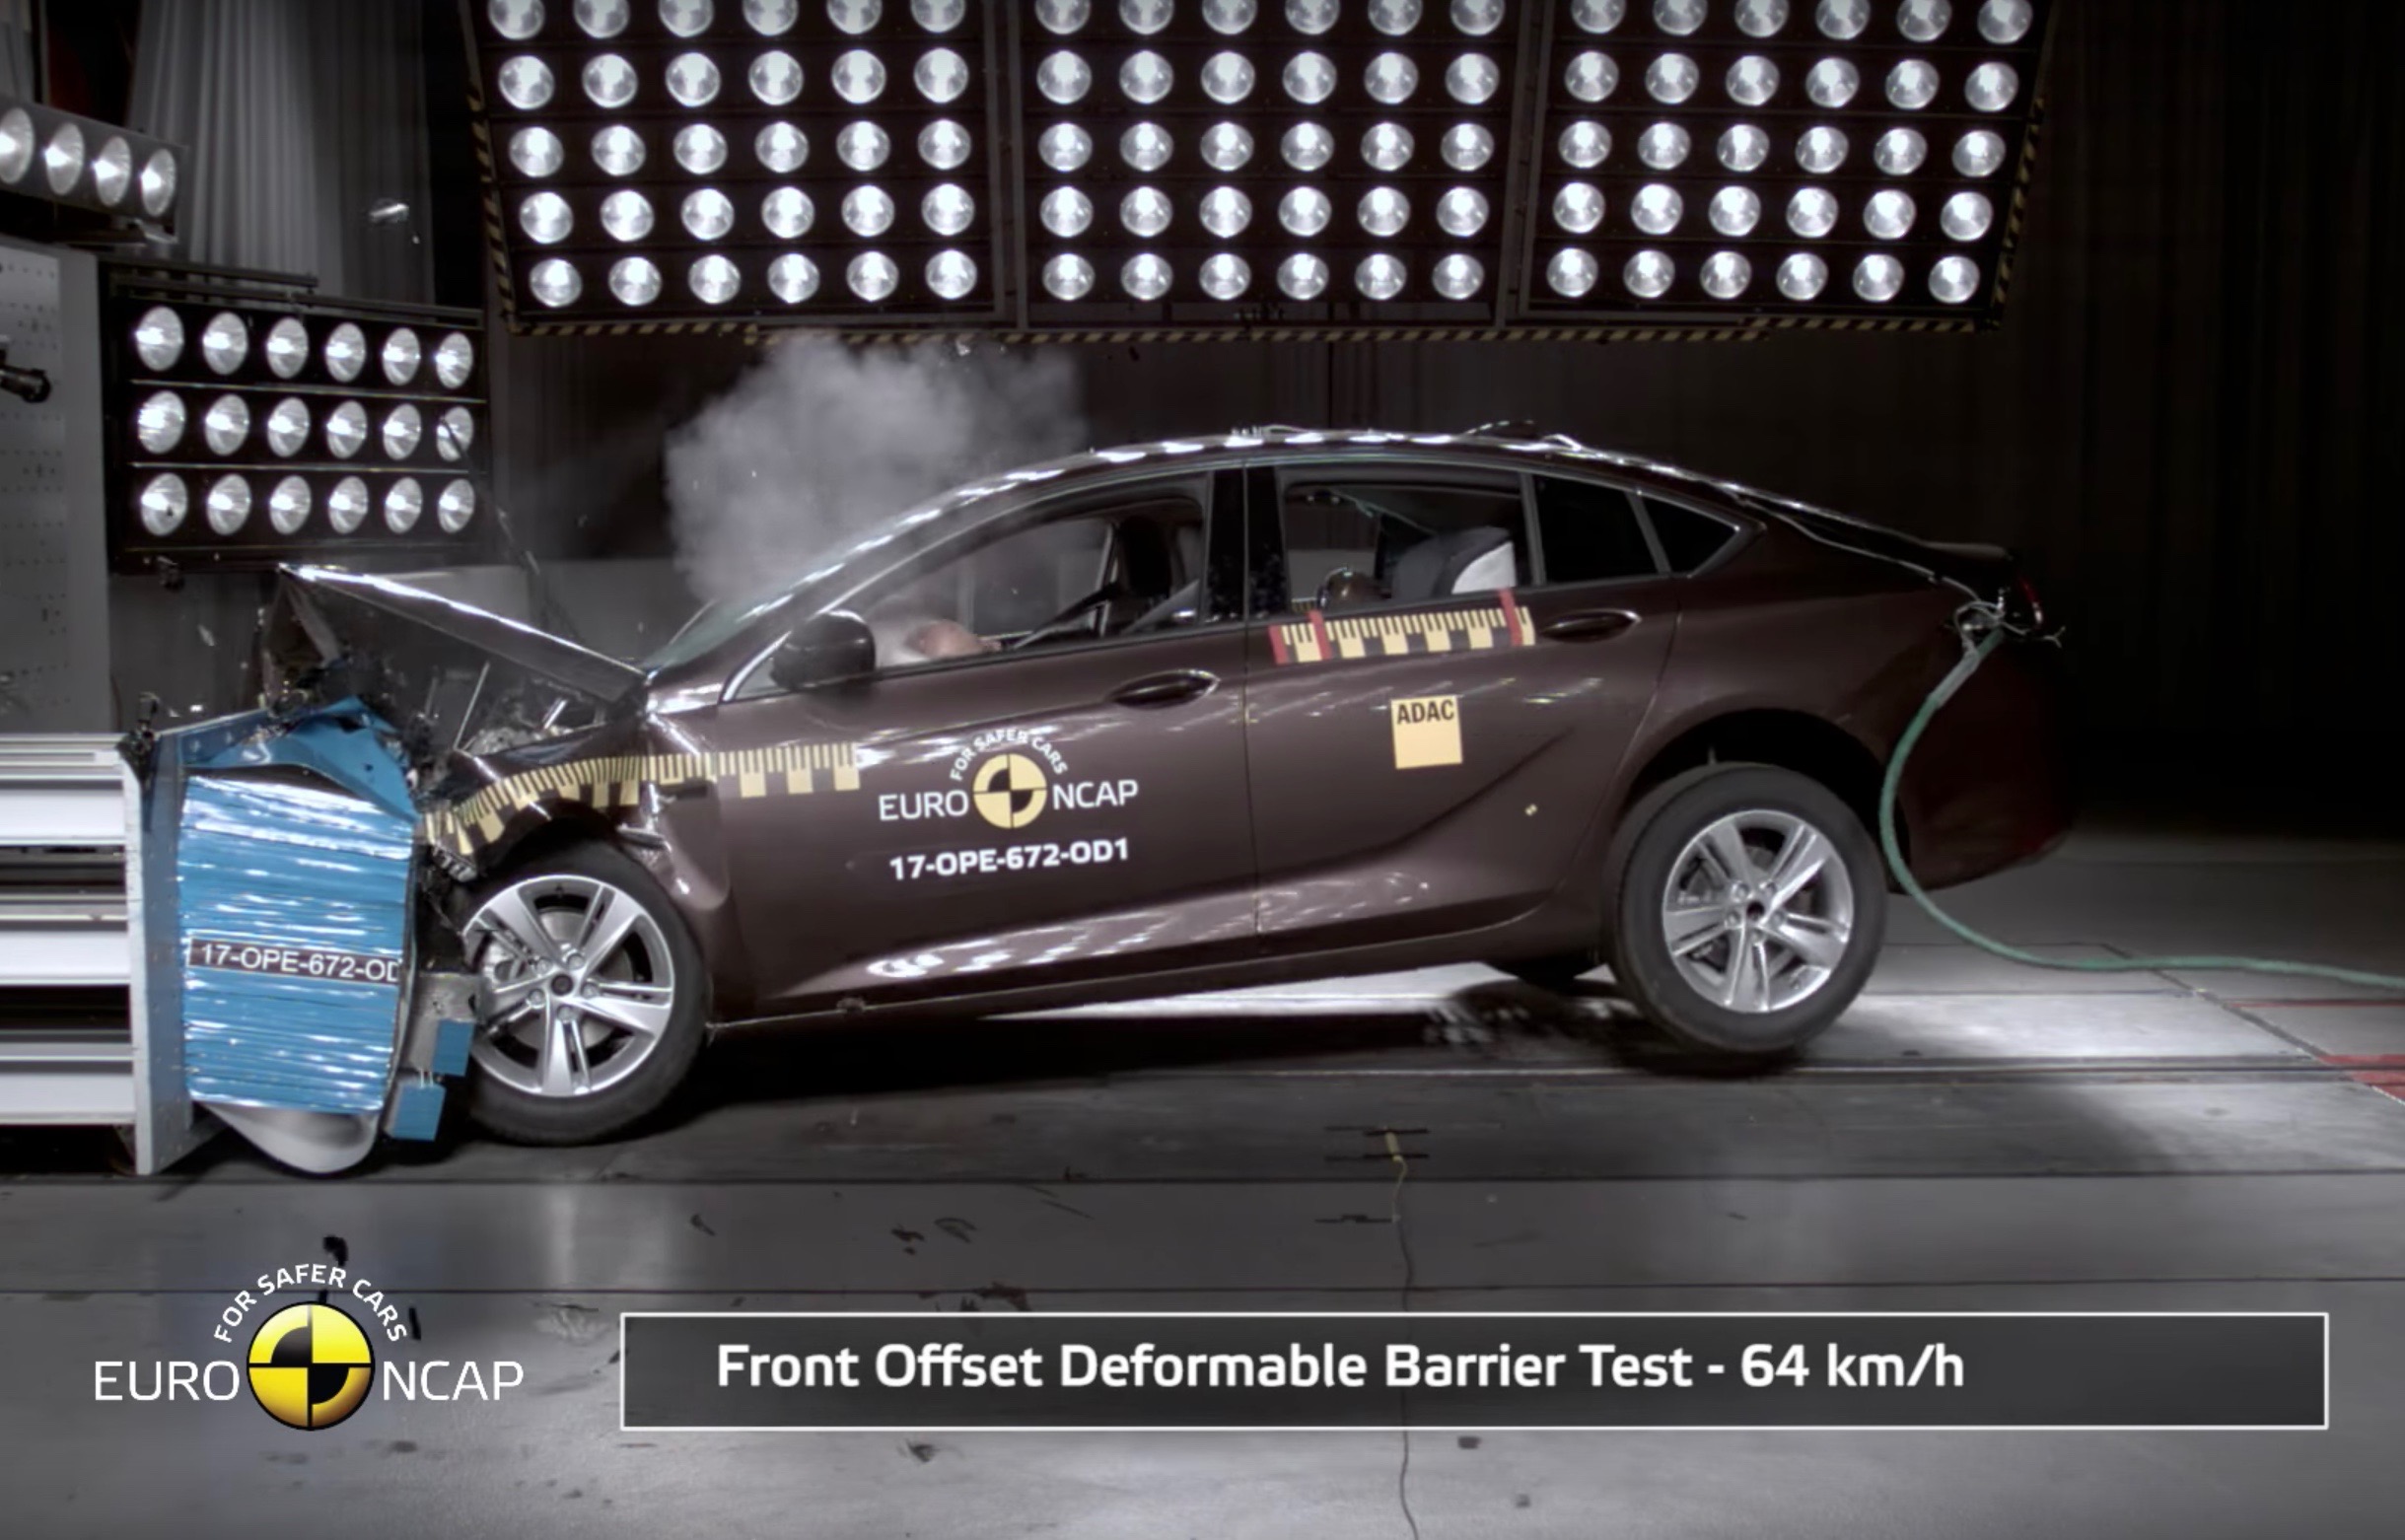 2018 Holden Commodore scores 5-star ANCAP safety rating